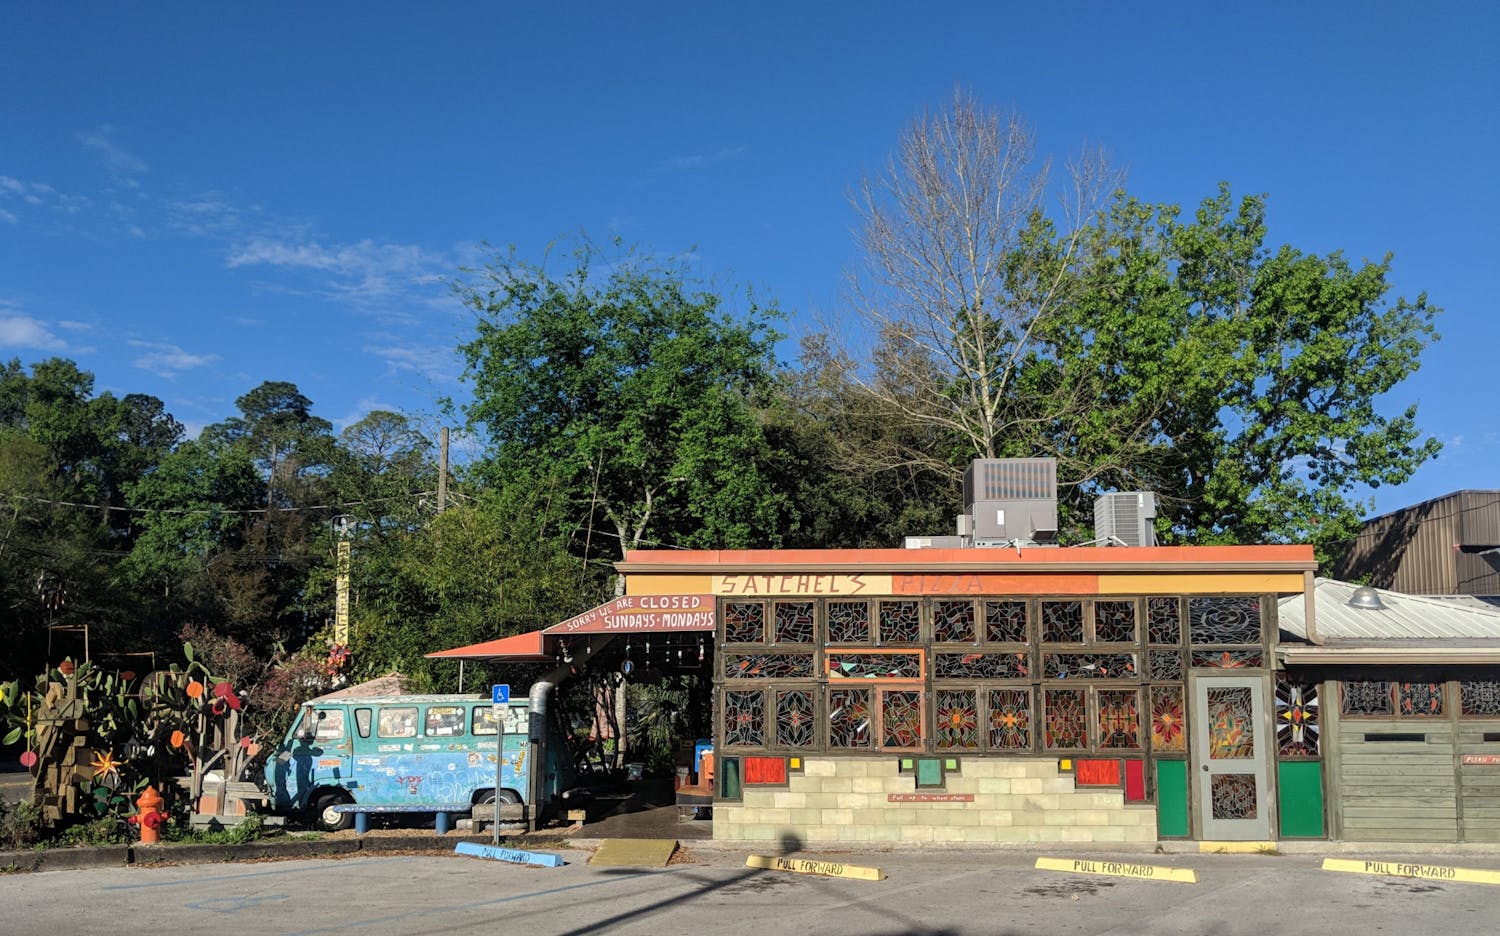 Satchel’s Pizza has been a staple in the Gainesville community since its opening in 2003.